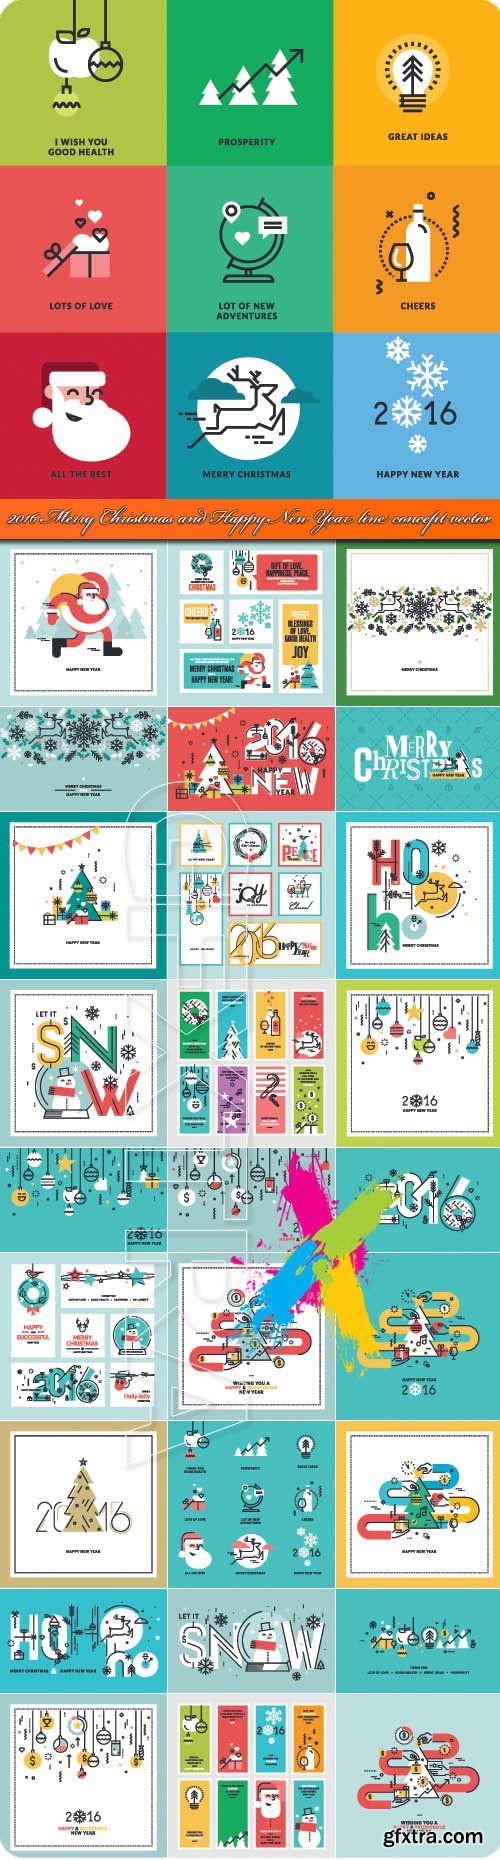 2016 Merry Christmas and Happy New Year line concept vector